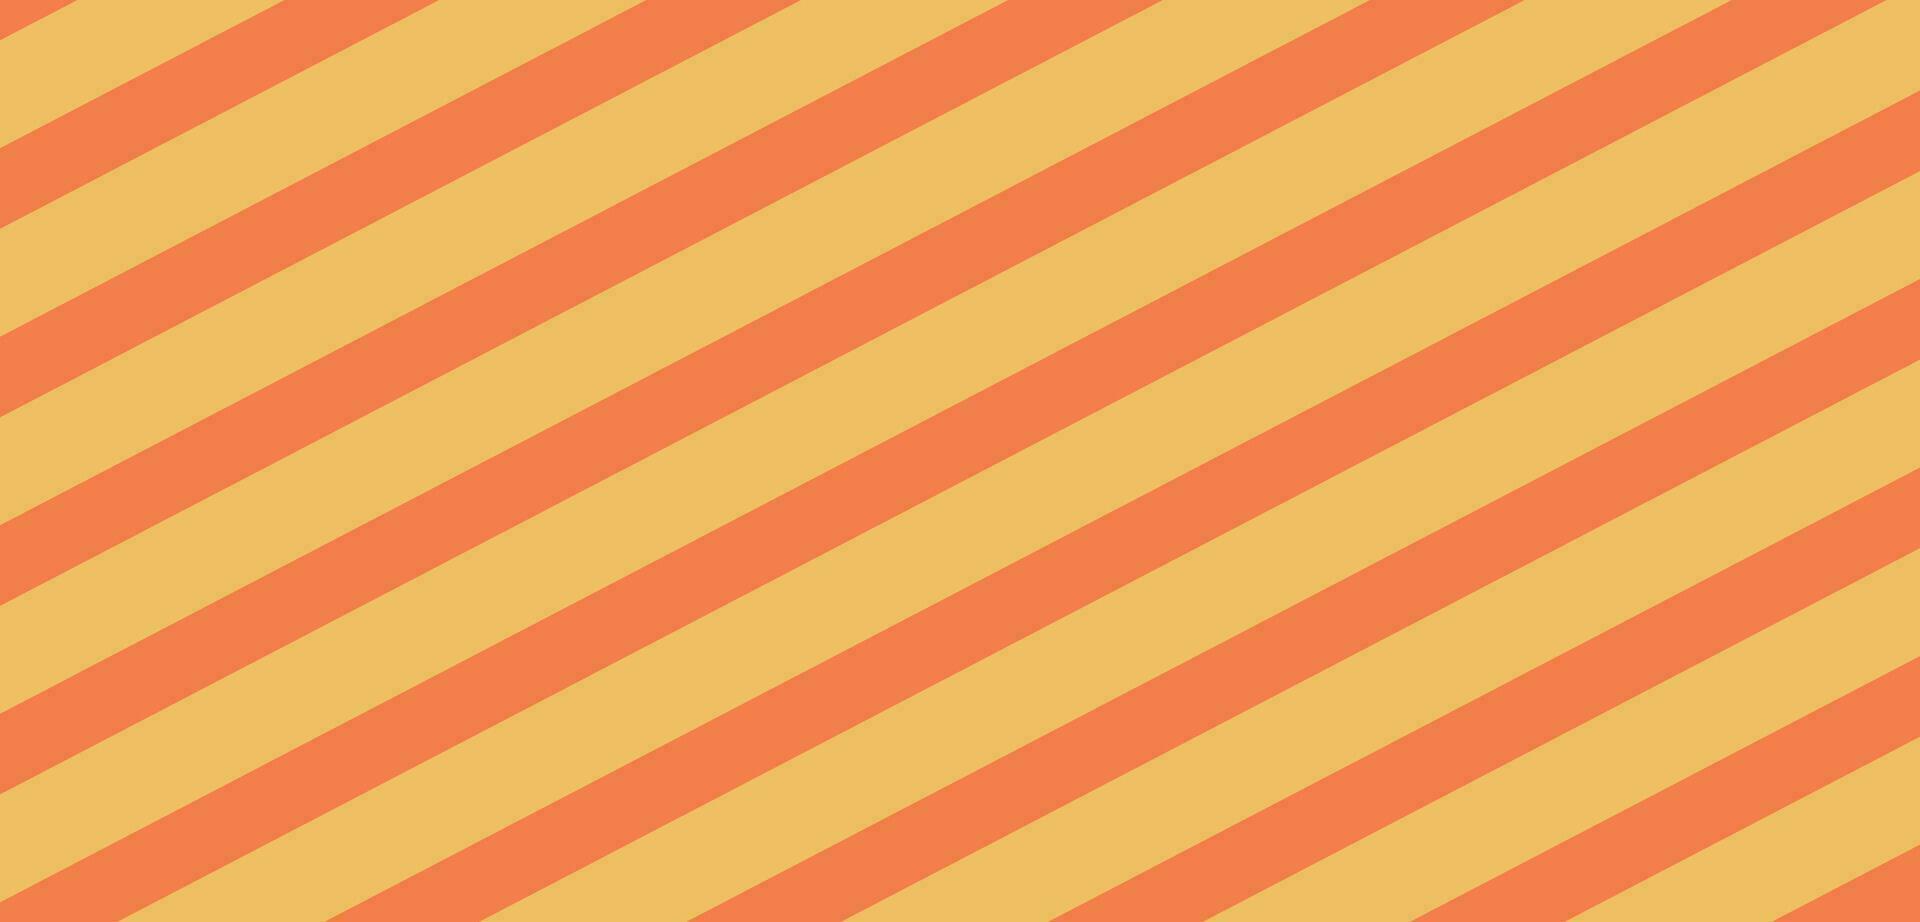 Diagonal background with orange and yellow color vector